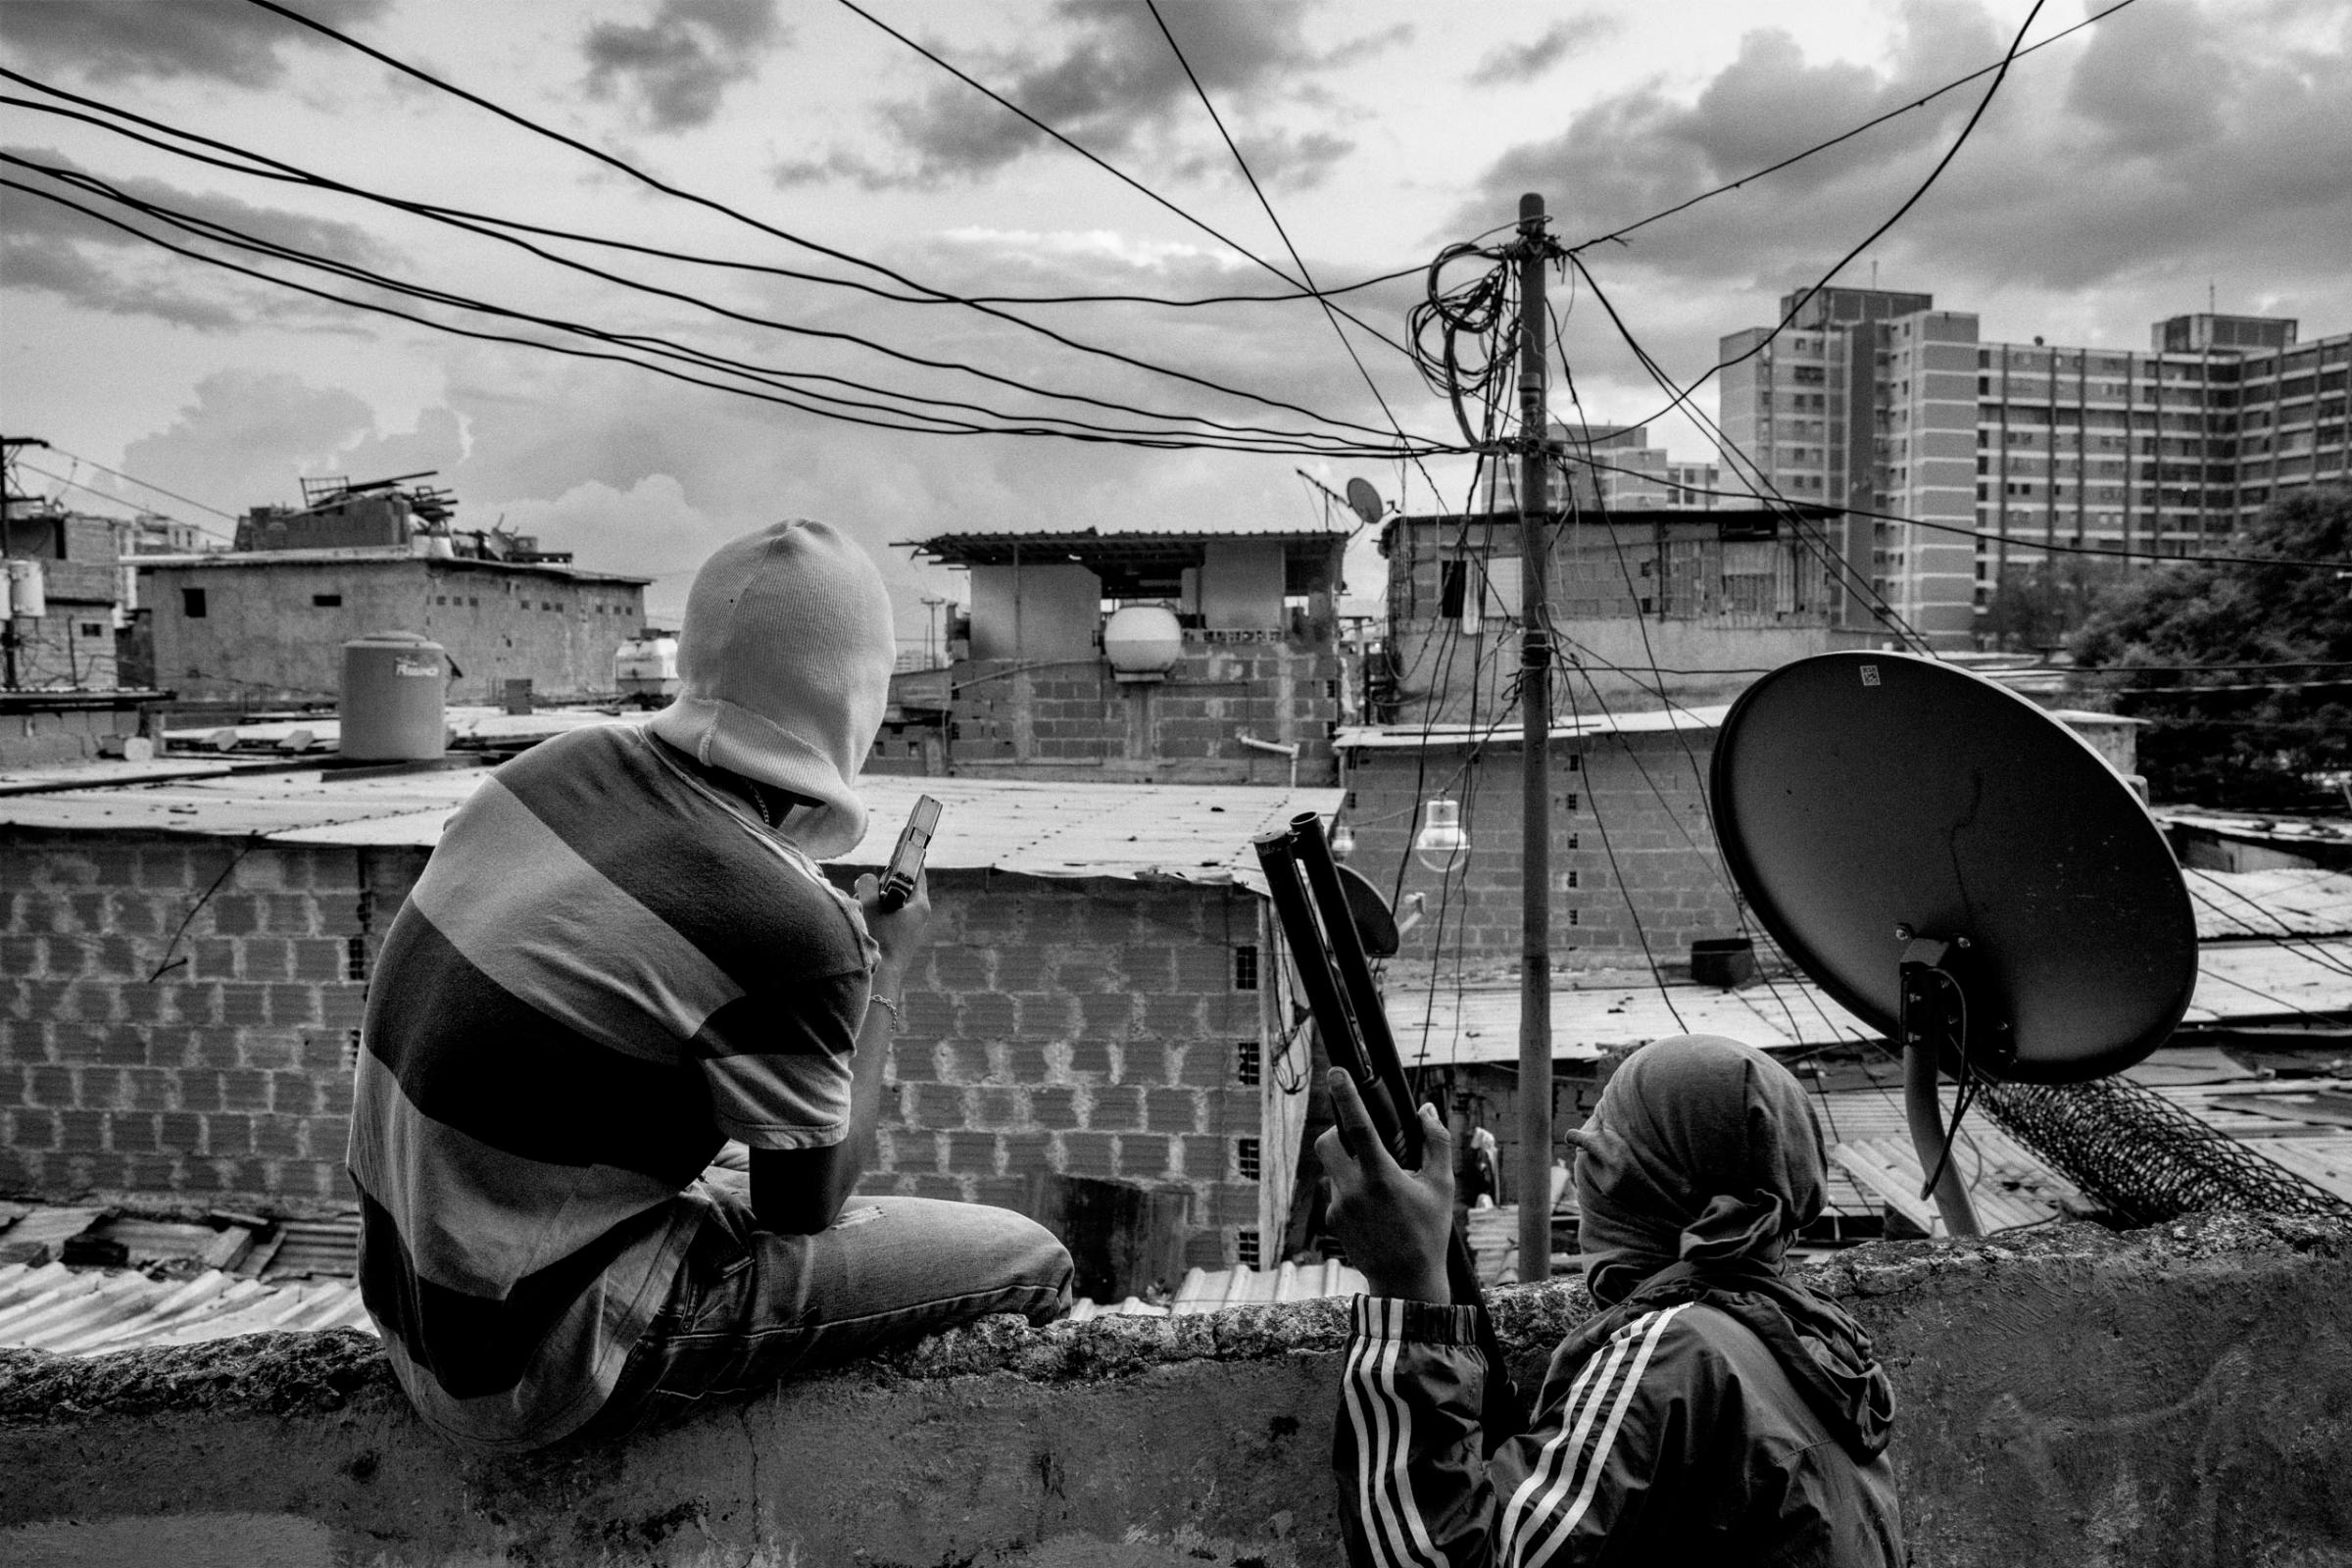 Members of a criminal gang lookout over their neighborhood in Caracas, Venezuela. Their faces are covered to avoid being identified by police, Caracas, Venezuela, Sept. 2015